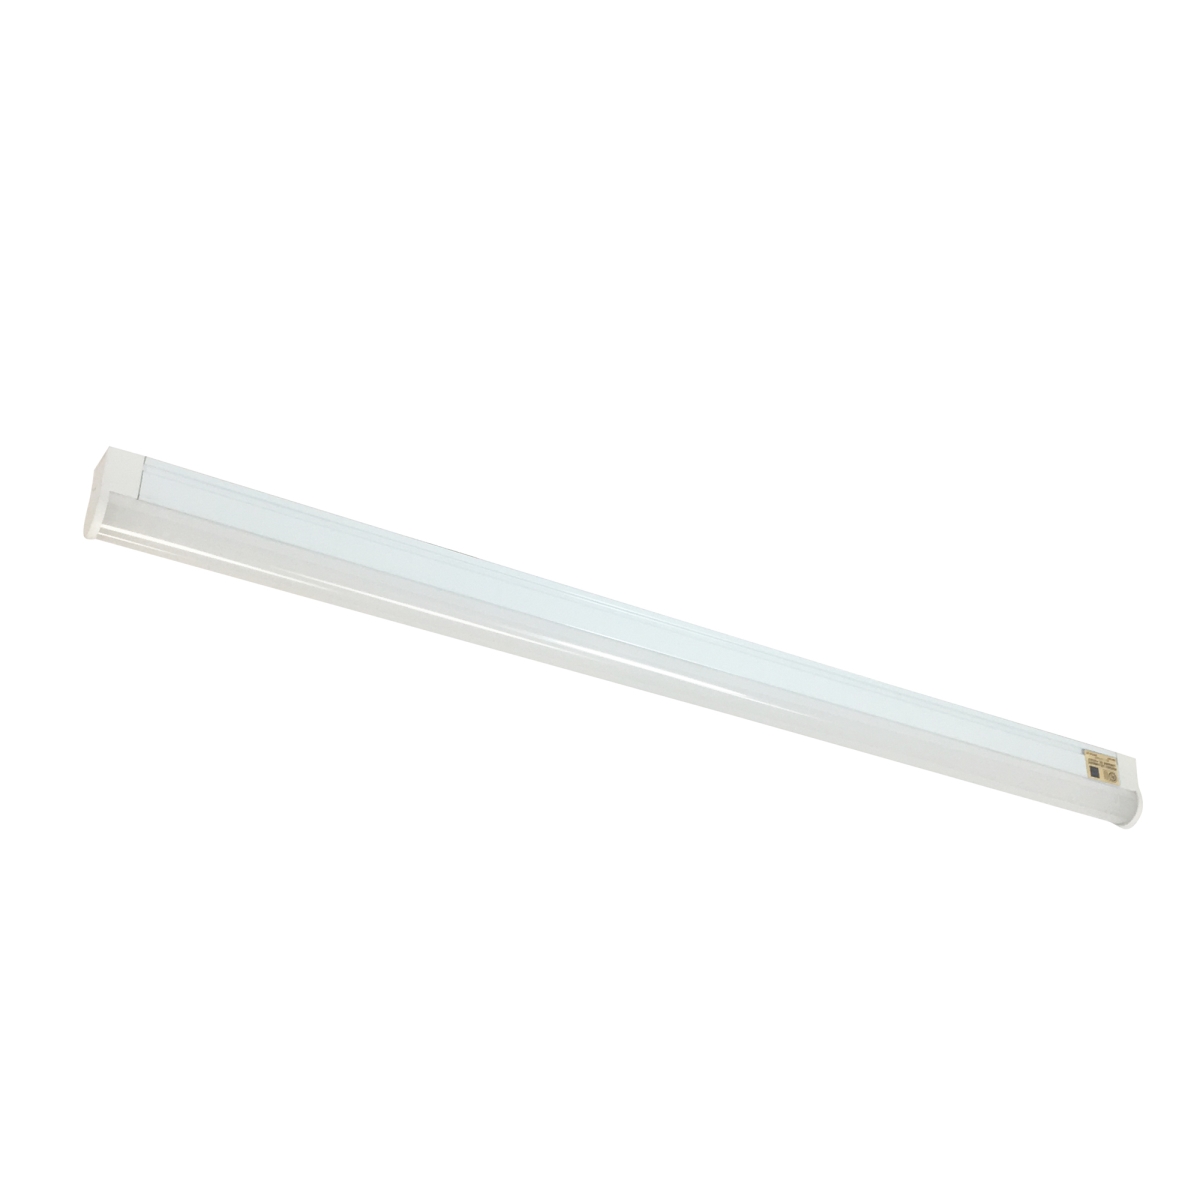 Picture of Nora Lighting NULS-LED4540W 45 in. 4000K Undercabinet Linear LED Fixture - White